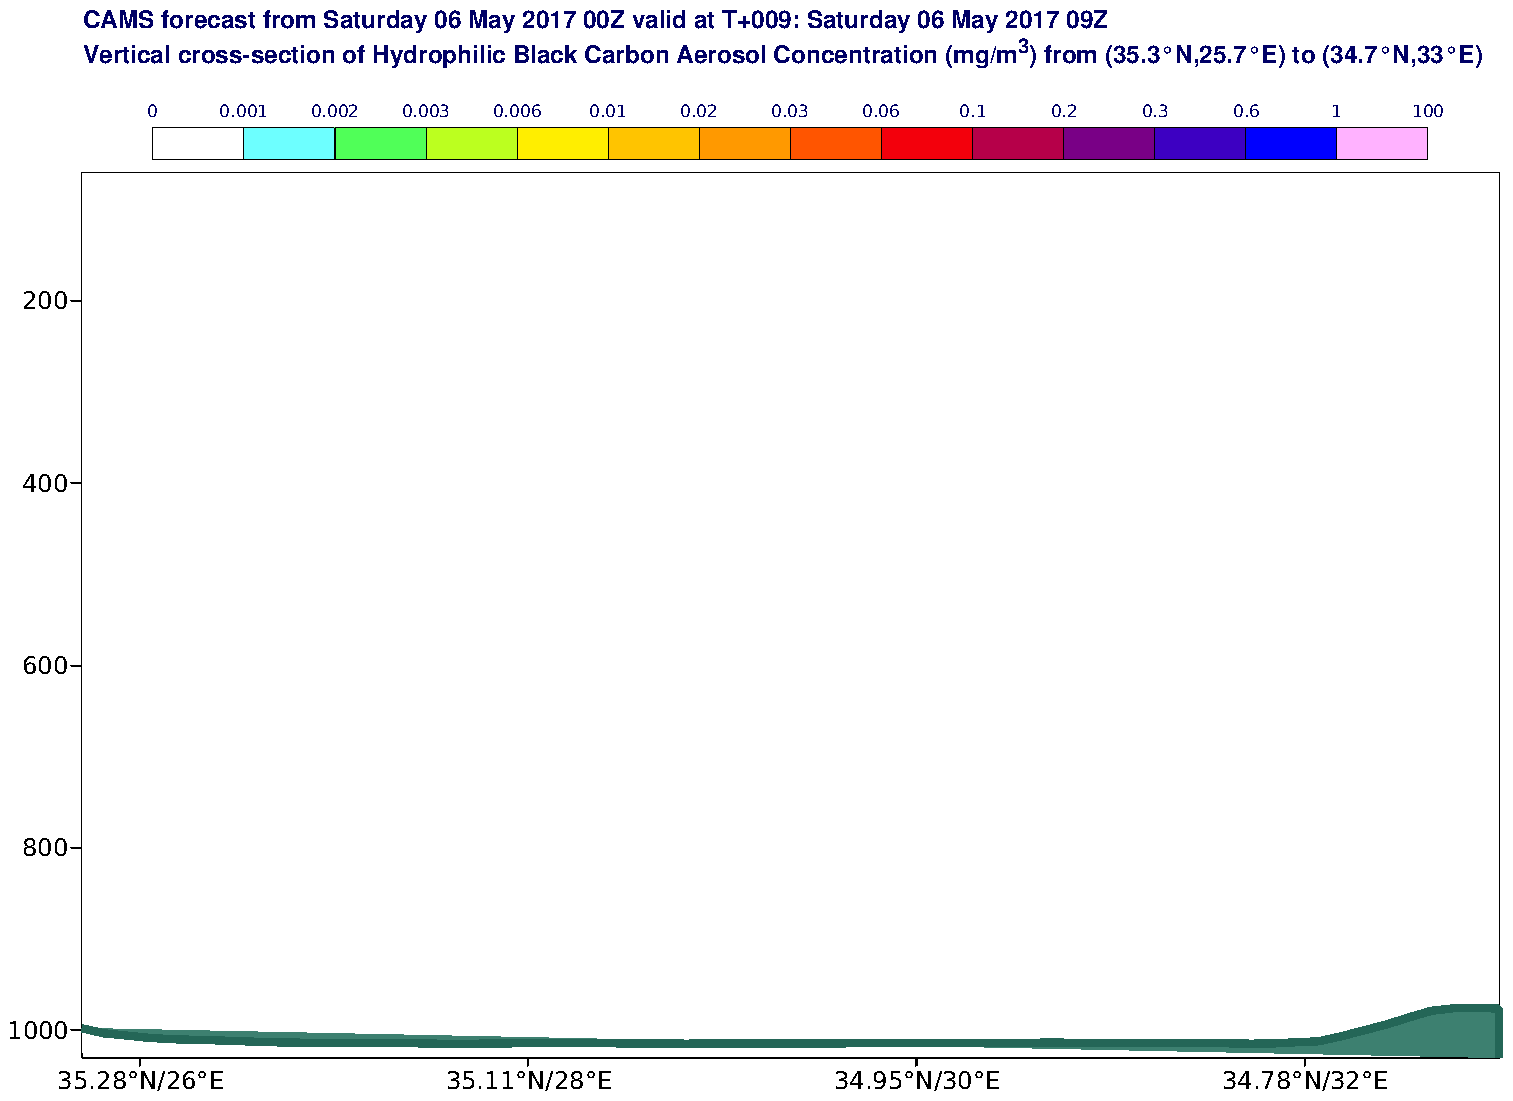 Vertical cross-section of Hydrophilic Black Carbon Aerosol Concentration (mg/m3) valid at T9 - 2017-05-06 09:00